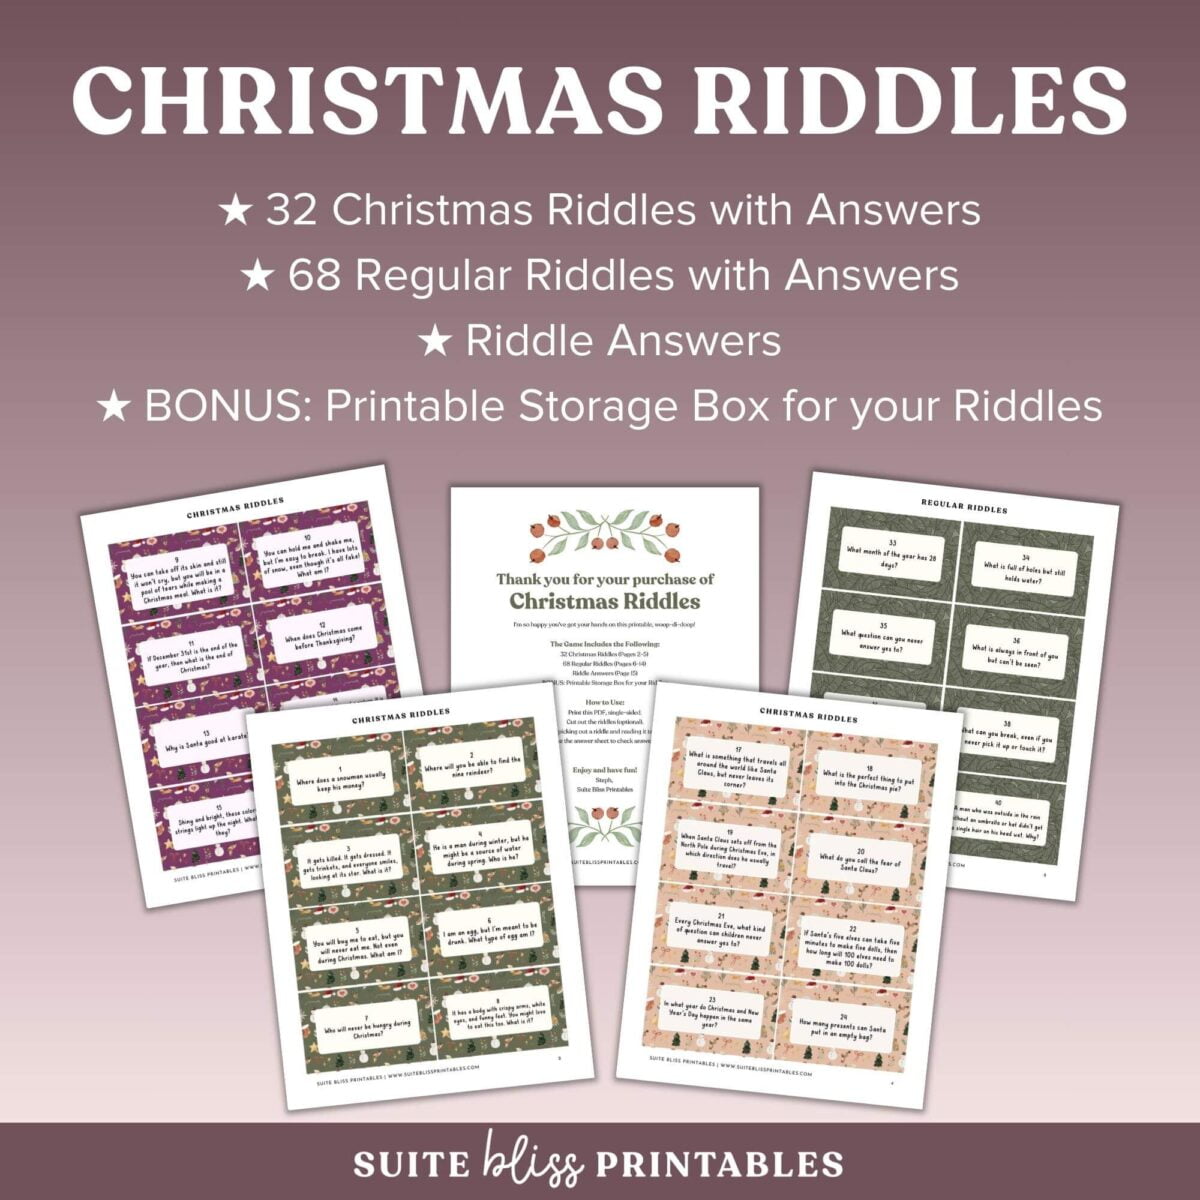 Printable Christmas Riddles with Answers 2